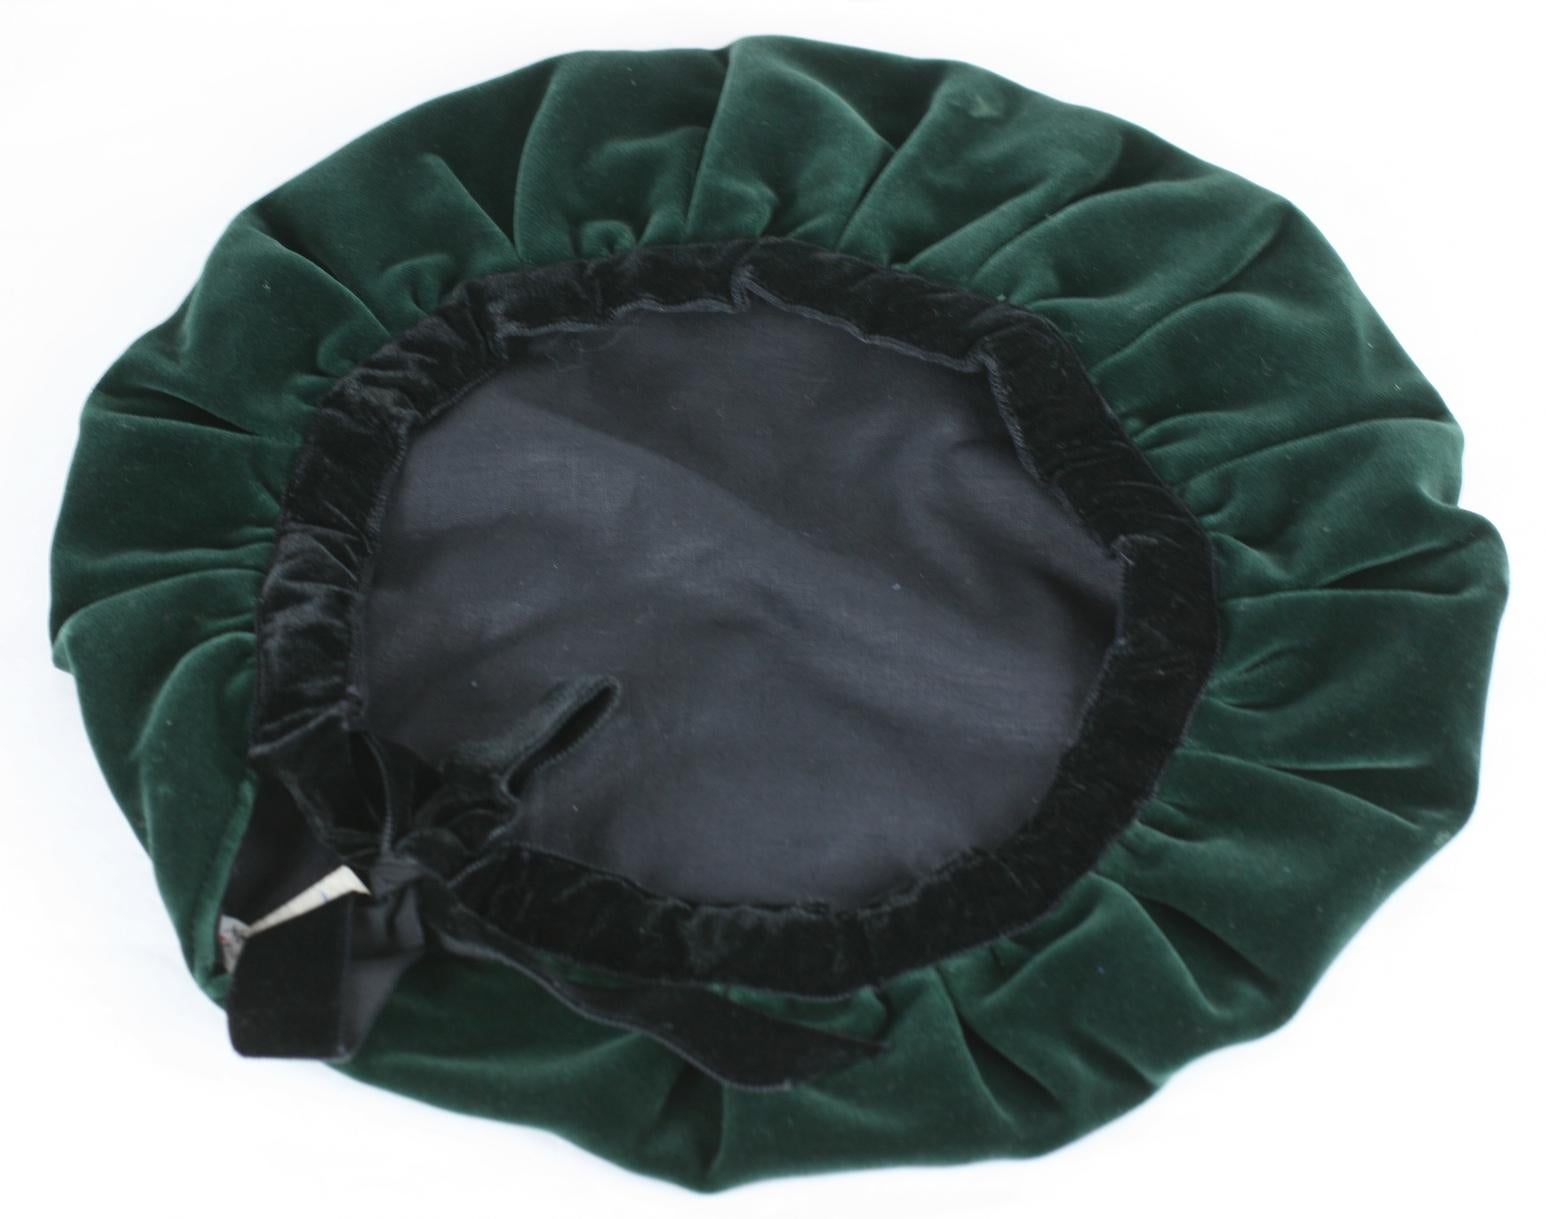 Iconic Yves Saint Laurent Velvet Beret In Excellent Condition For Sale In New York, NY